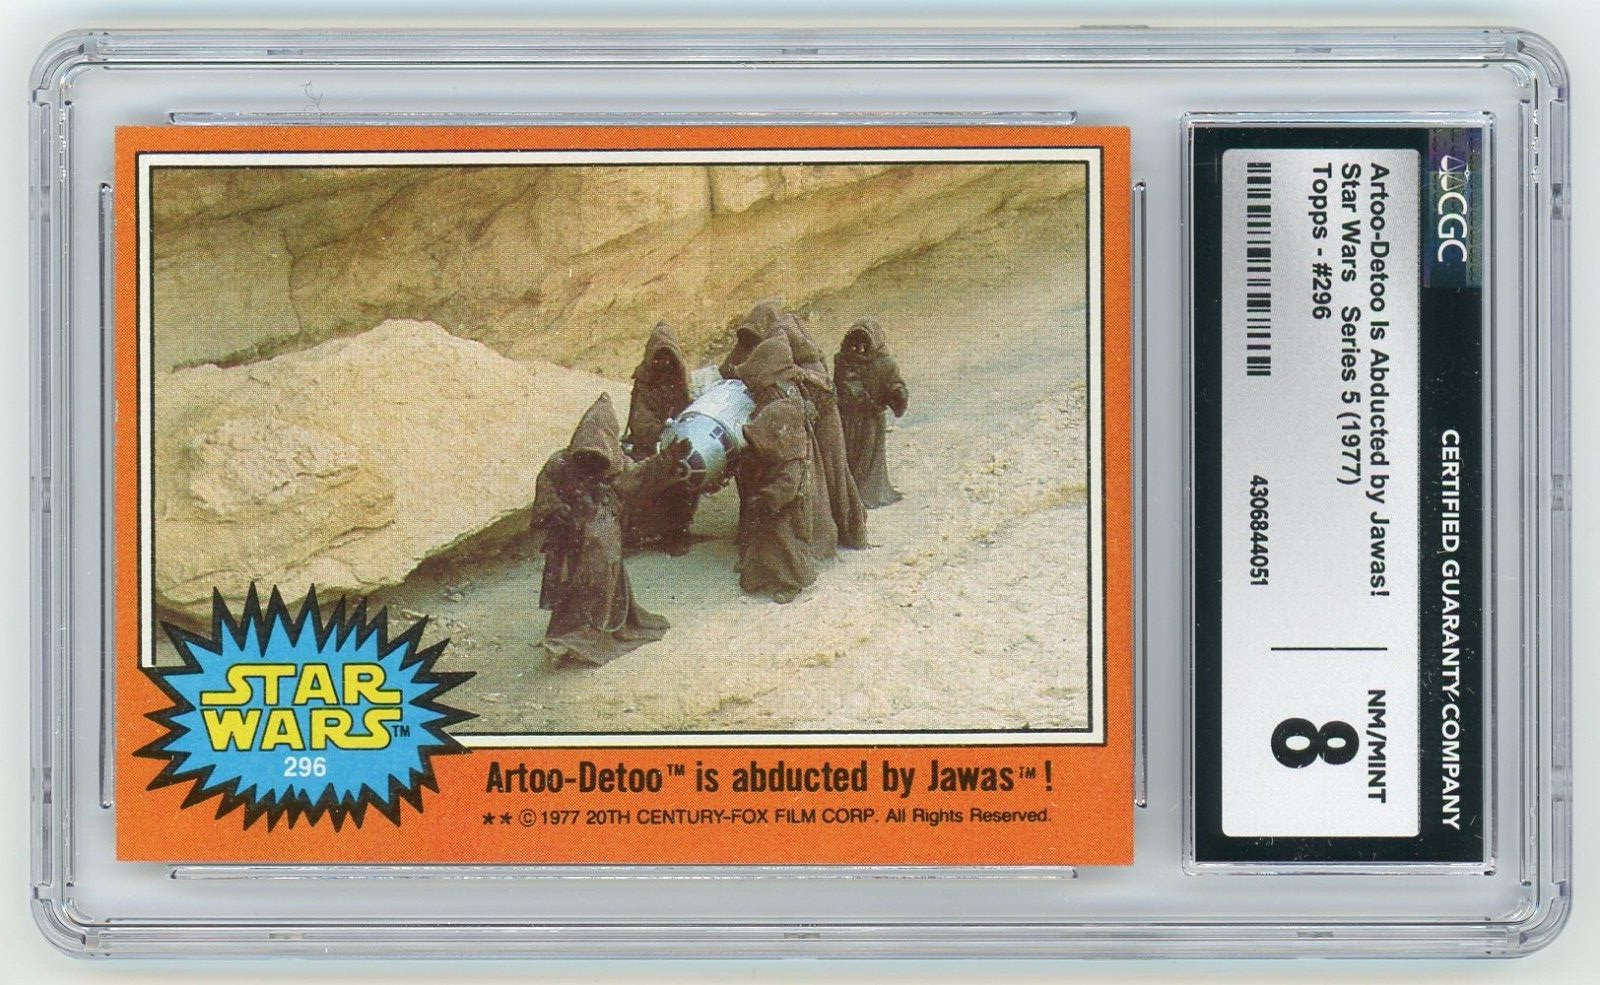 1977 Topps Star Wars #296 Artoo-Detoo Is Abducted by Jawas  CGC 8 NM/MINT #44051